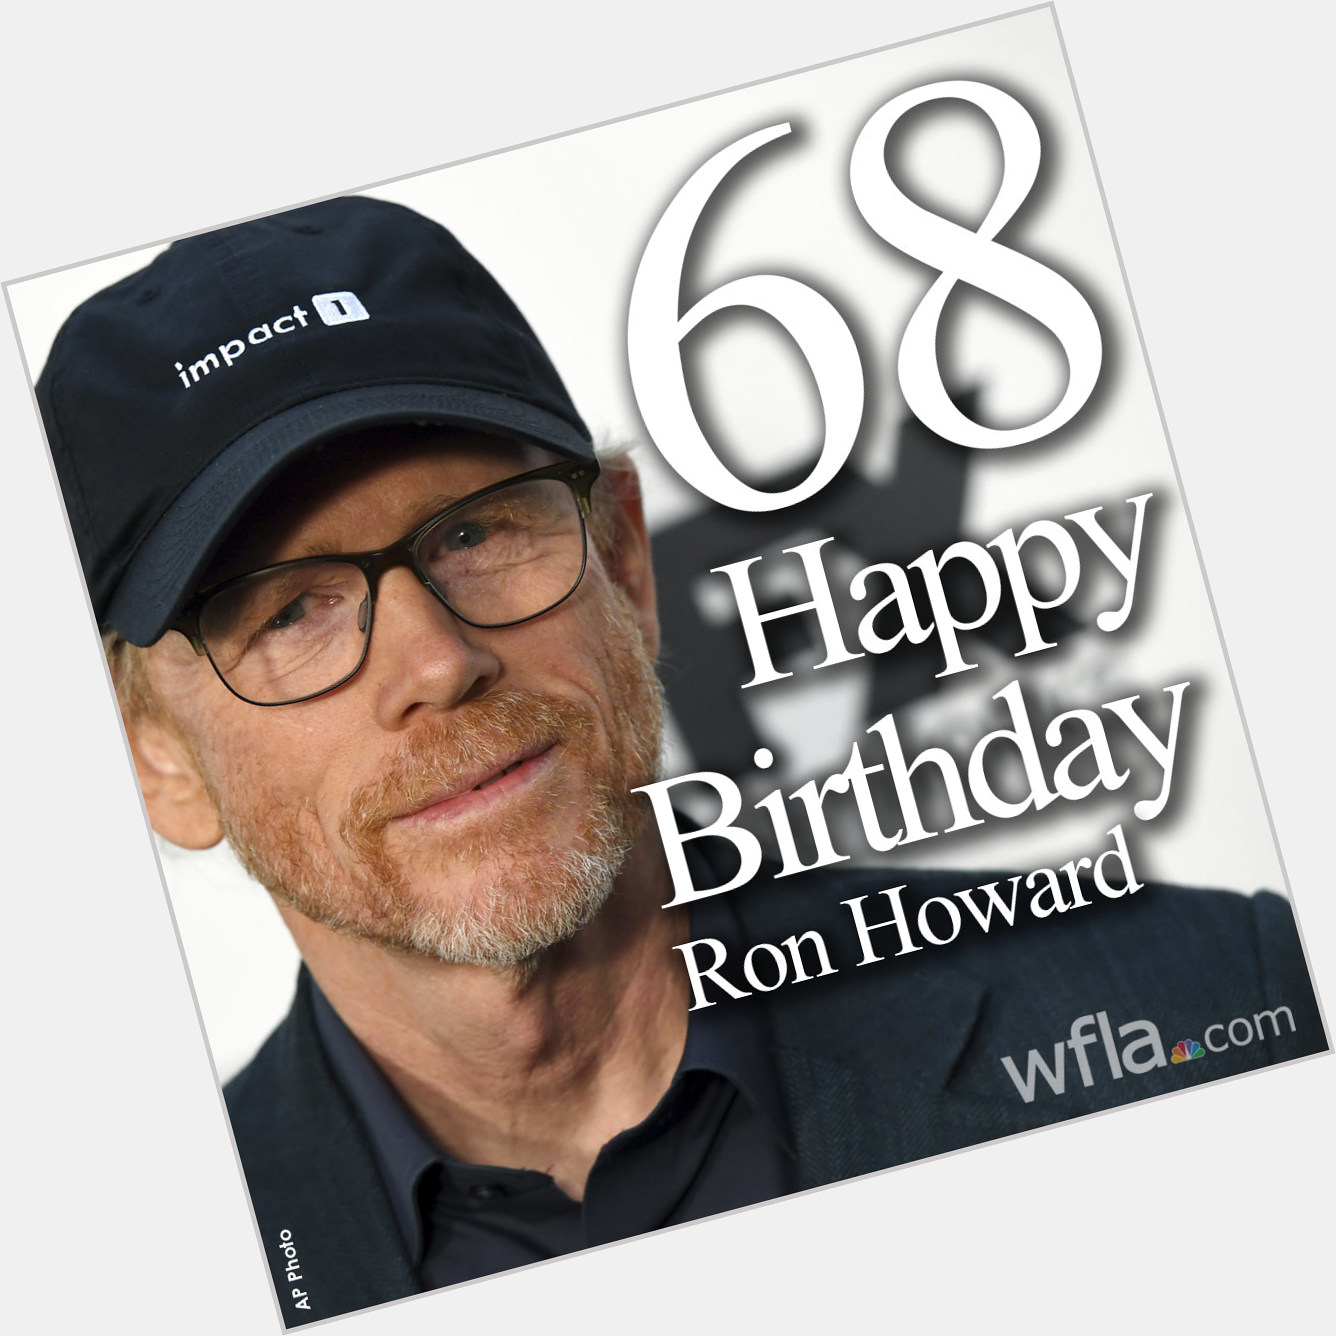 Join us in wishing a happy 68th birthday to filmmaker and actor Ron Howard!  